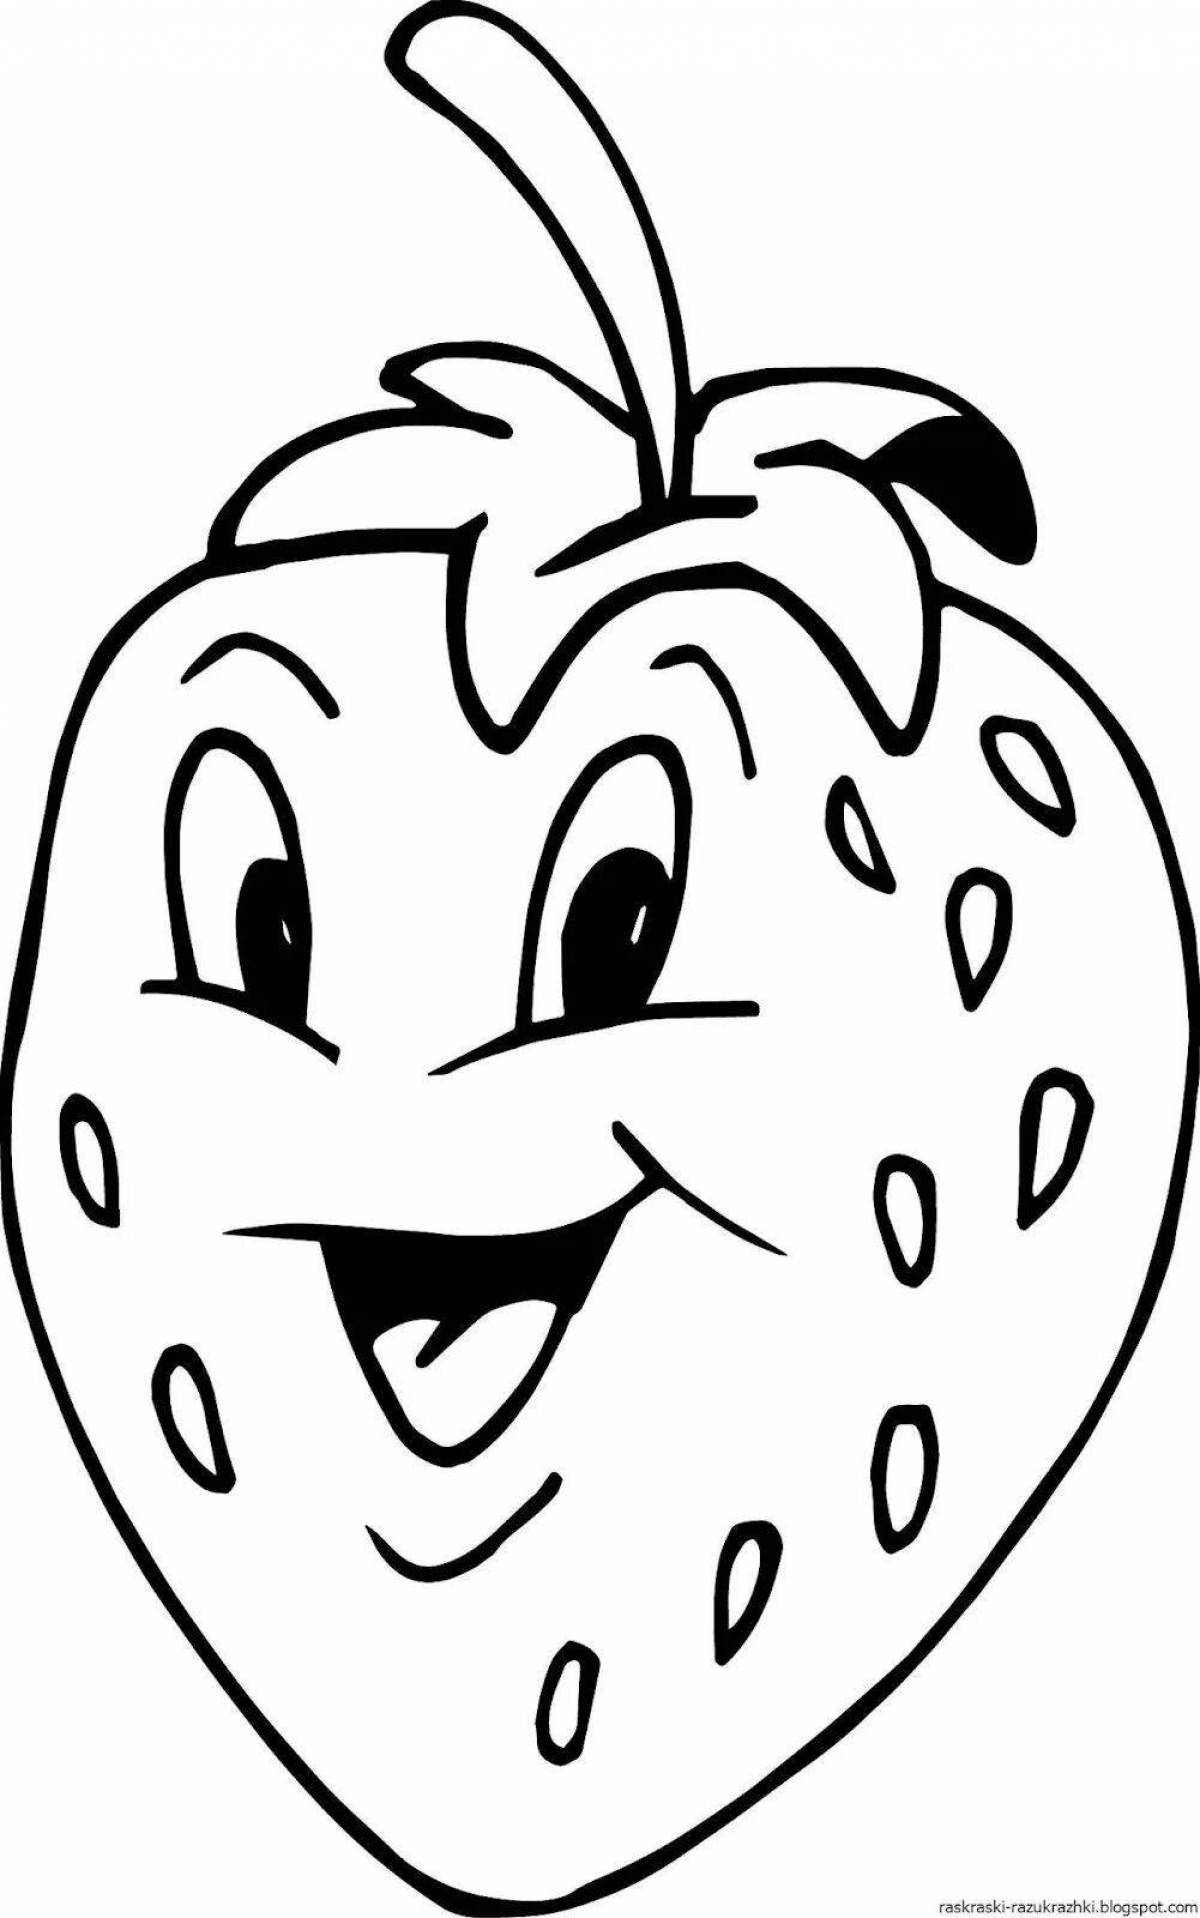 Cute strawberry drawing coloring book